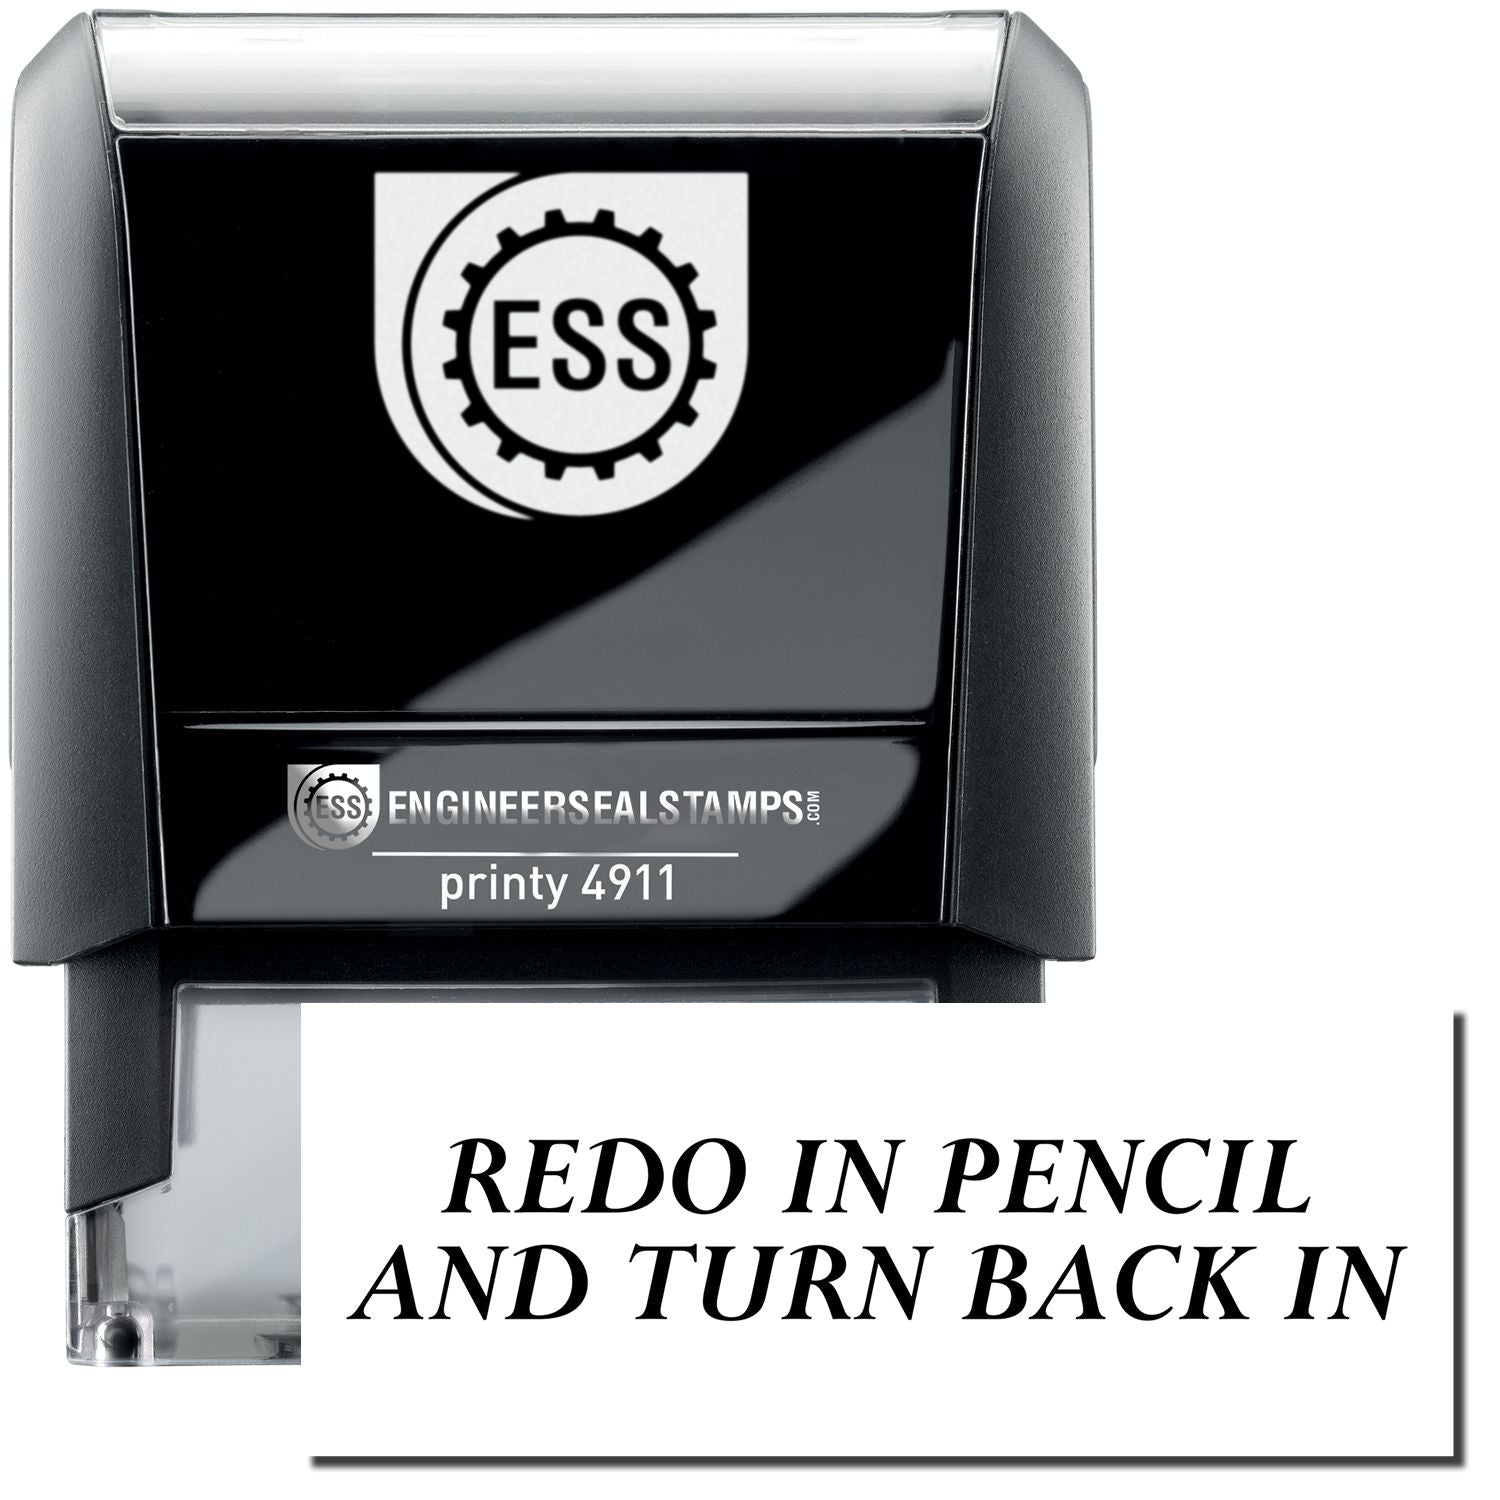 A self-inking stamp with a stamped image showing how the text "REDO IN PENCIL AND TURN BACK IN" is displayed after stamping.